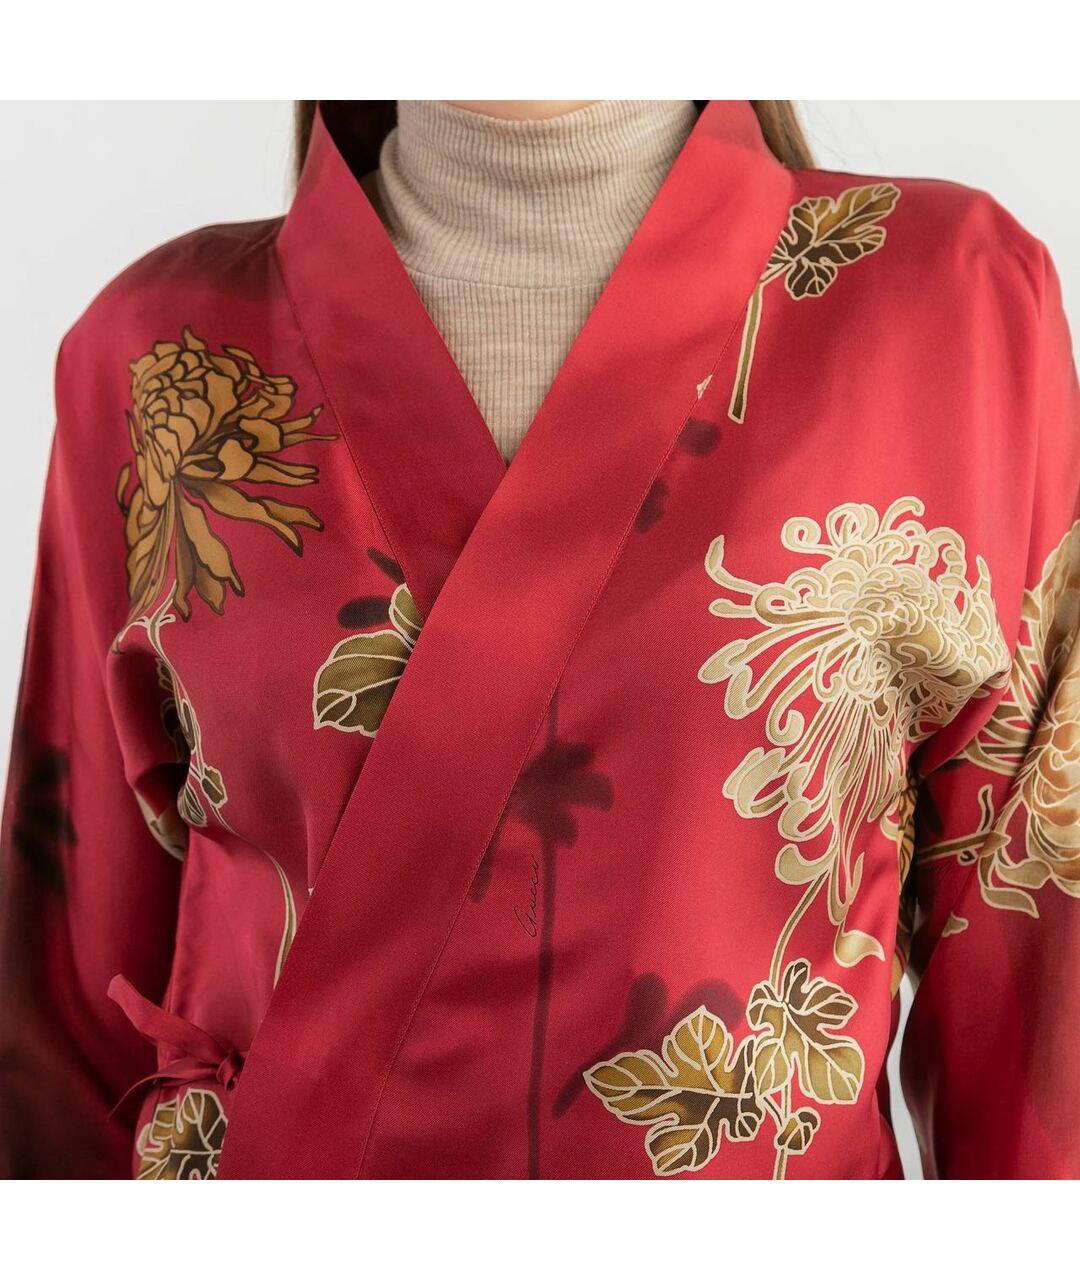 Vintage Tom Ford for Gucci Silk Kimono Shirt

IT Size 38

100% Silk

Excellent condition 